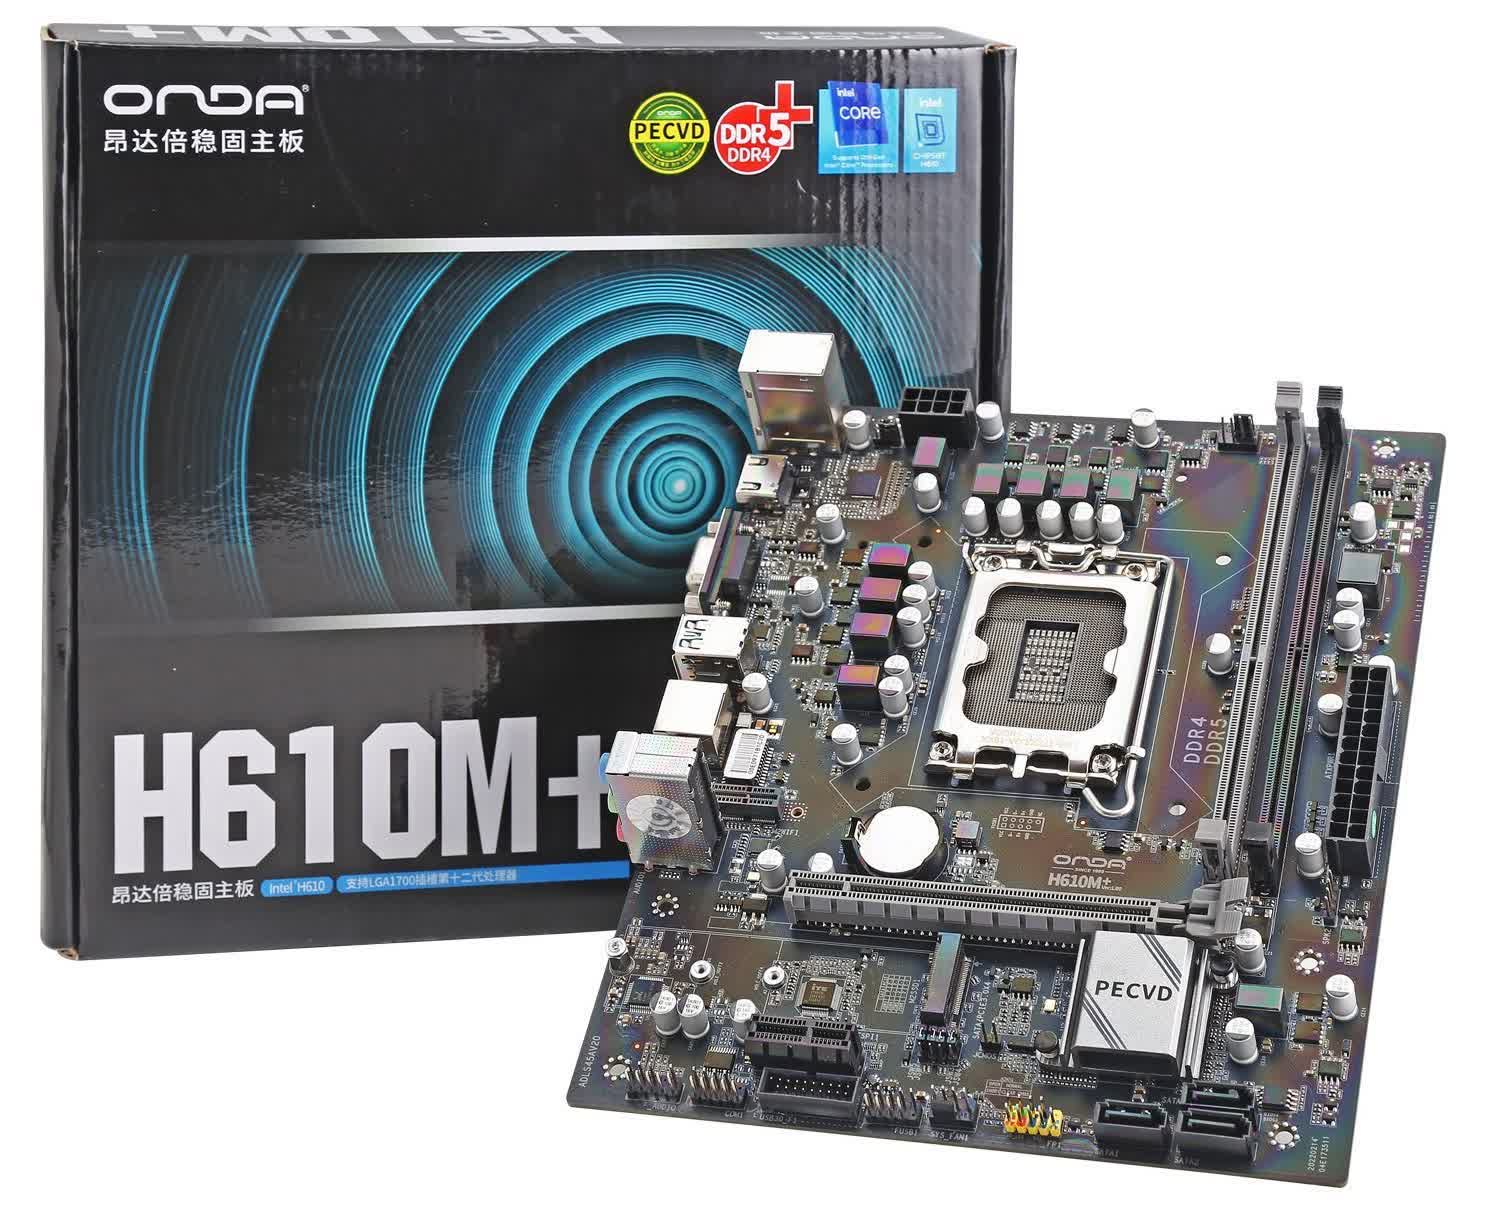 New Alder Lake motherboard supports both DDR4 and DDR5 memory